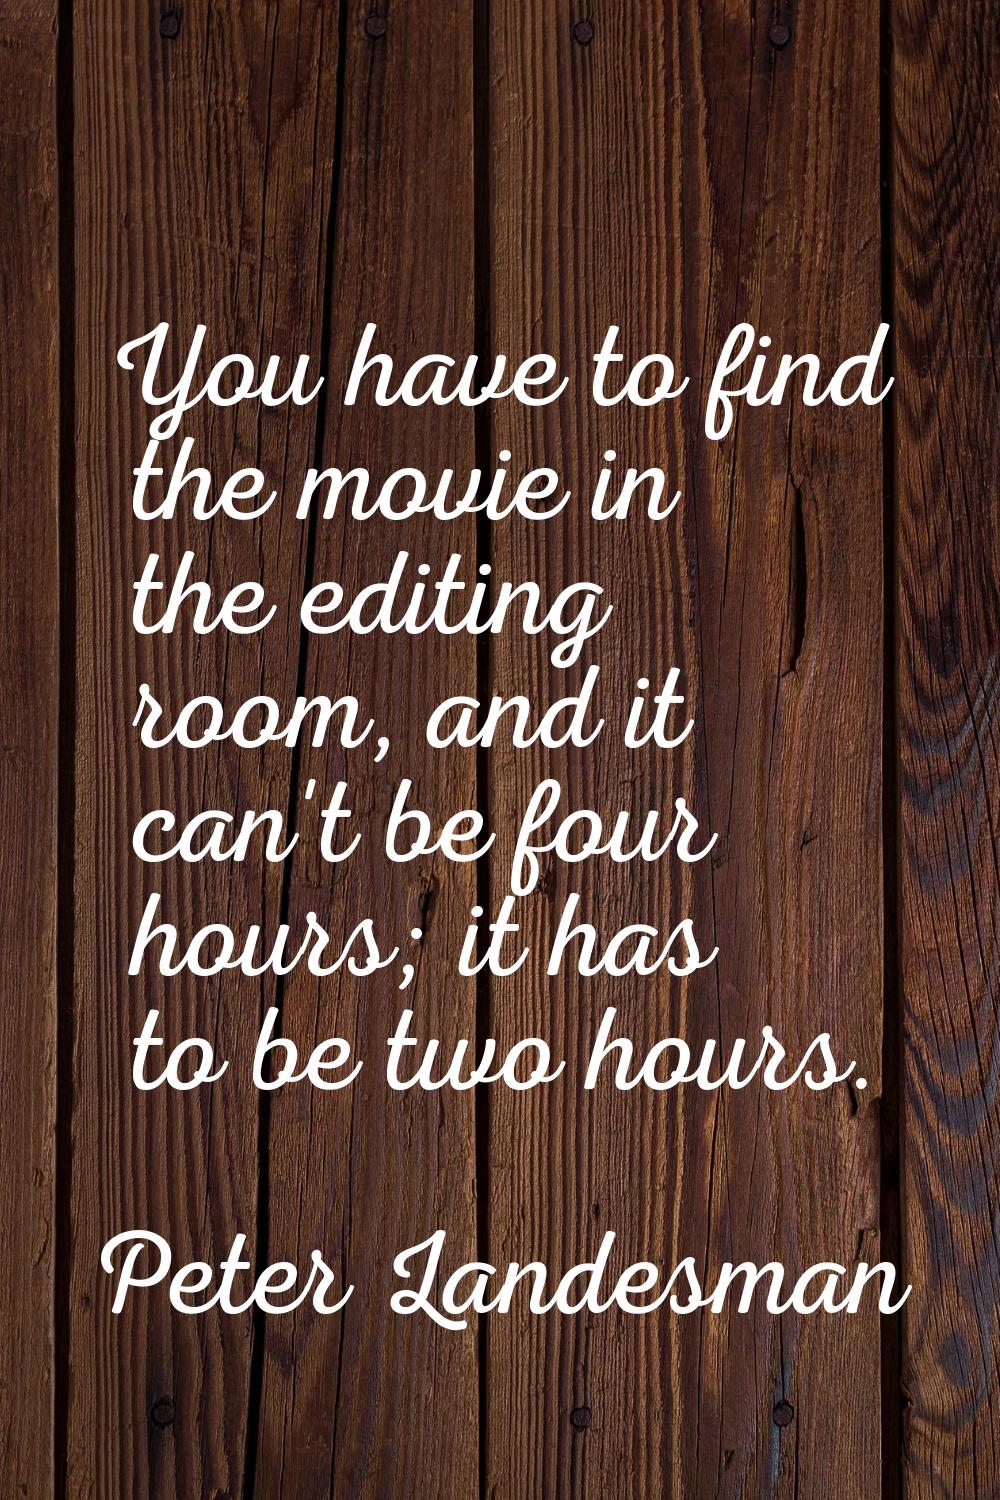 You have to find the movie in the editing room, and it can't be four hours; it has to be two hours.